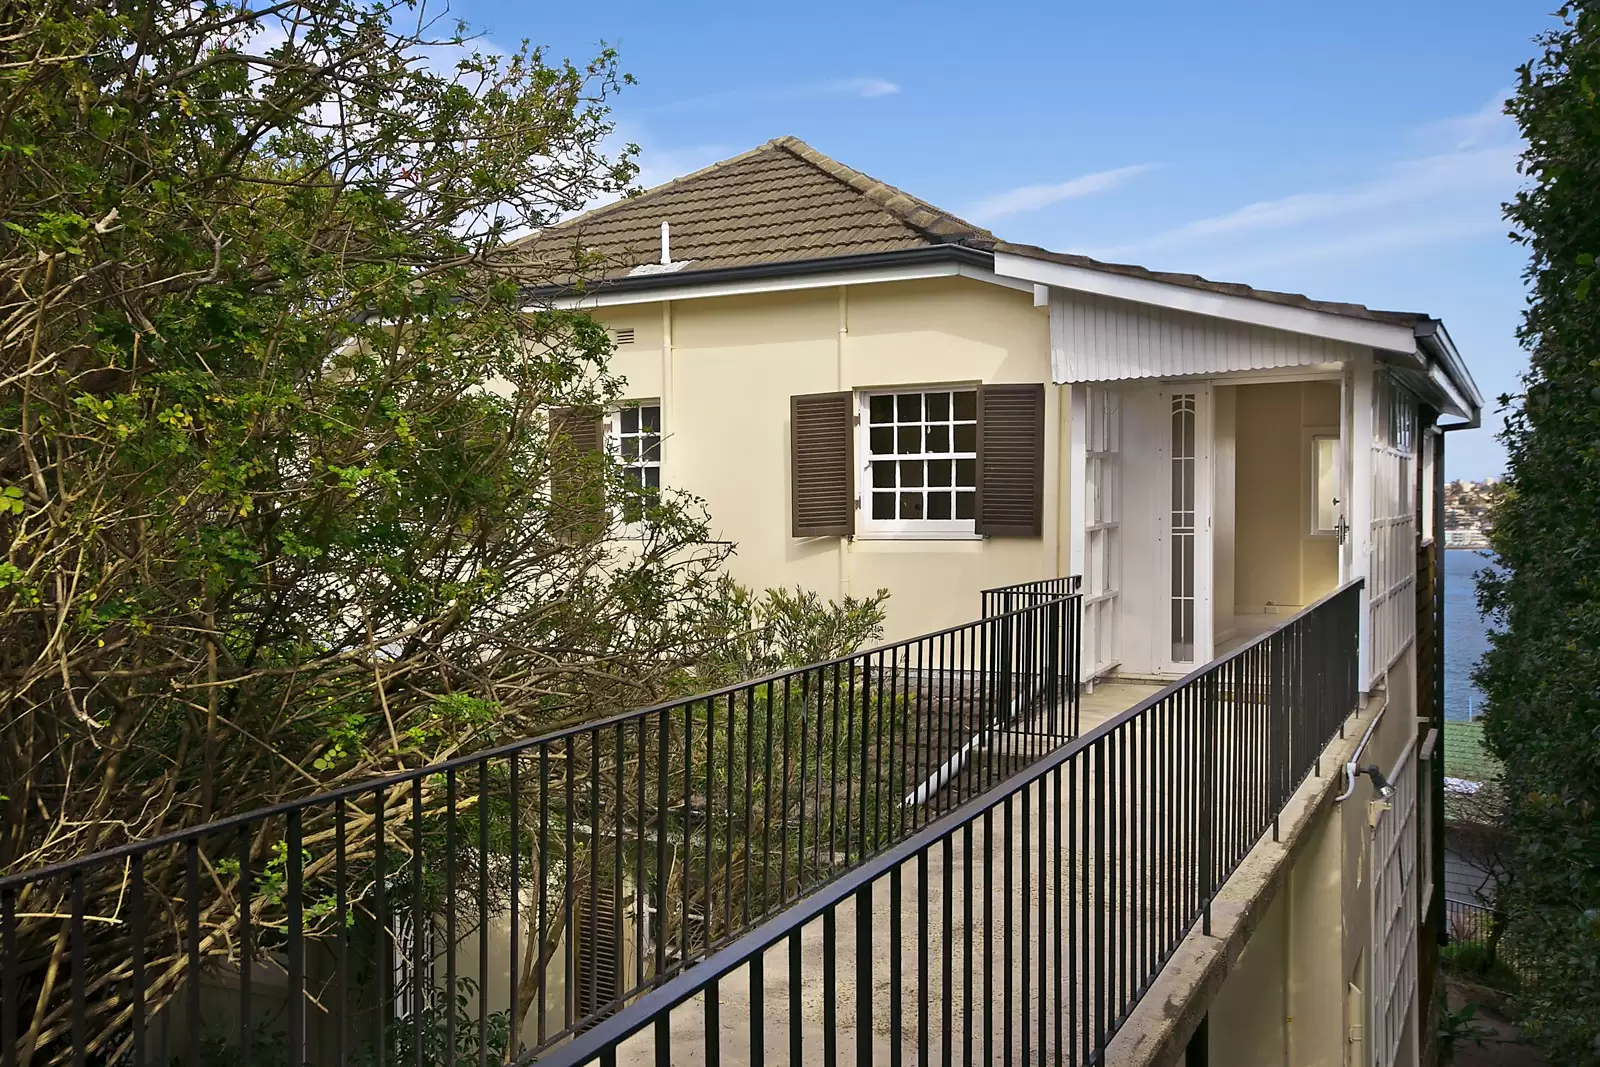 Photo #8: 32 Wentworth Road, Vaucluse - Sold by Sydney Sotheby's International Realty